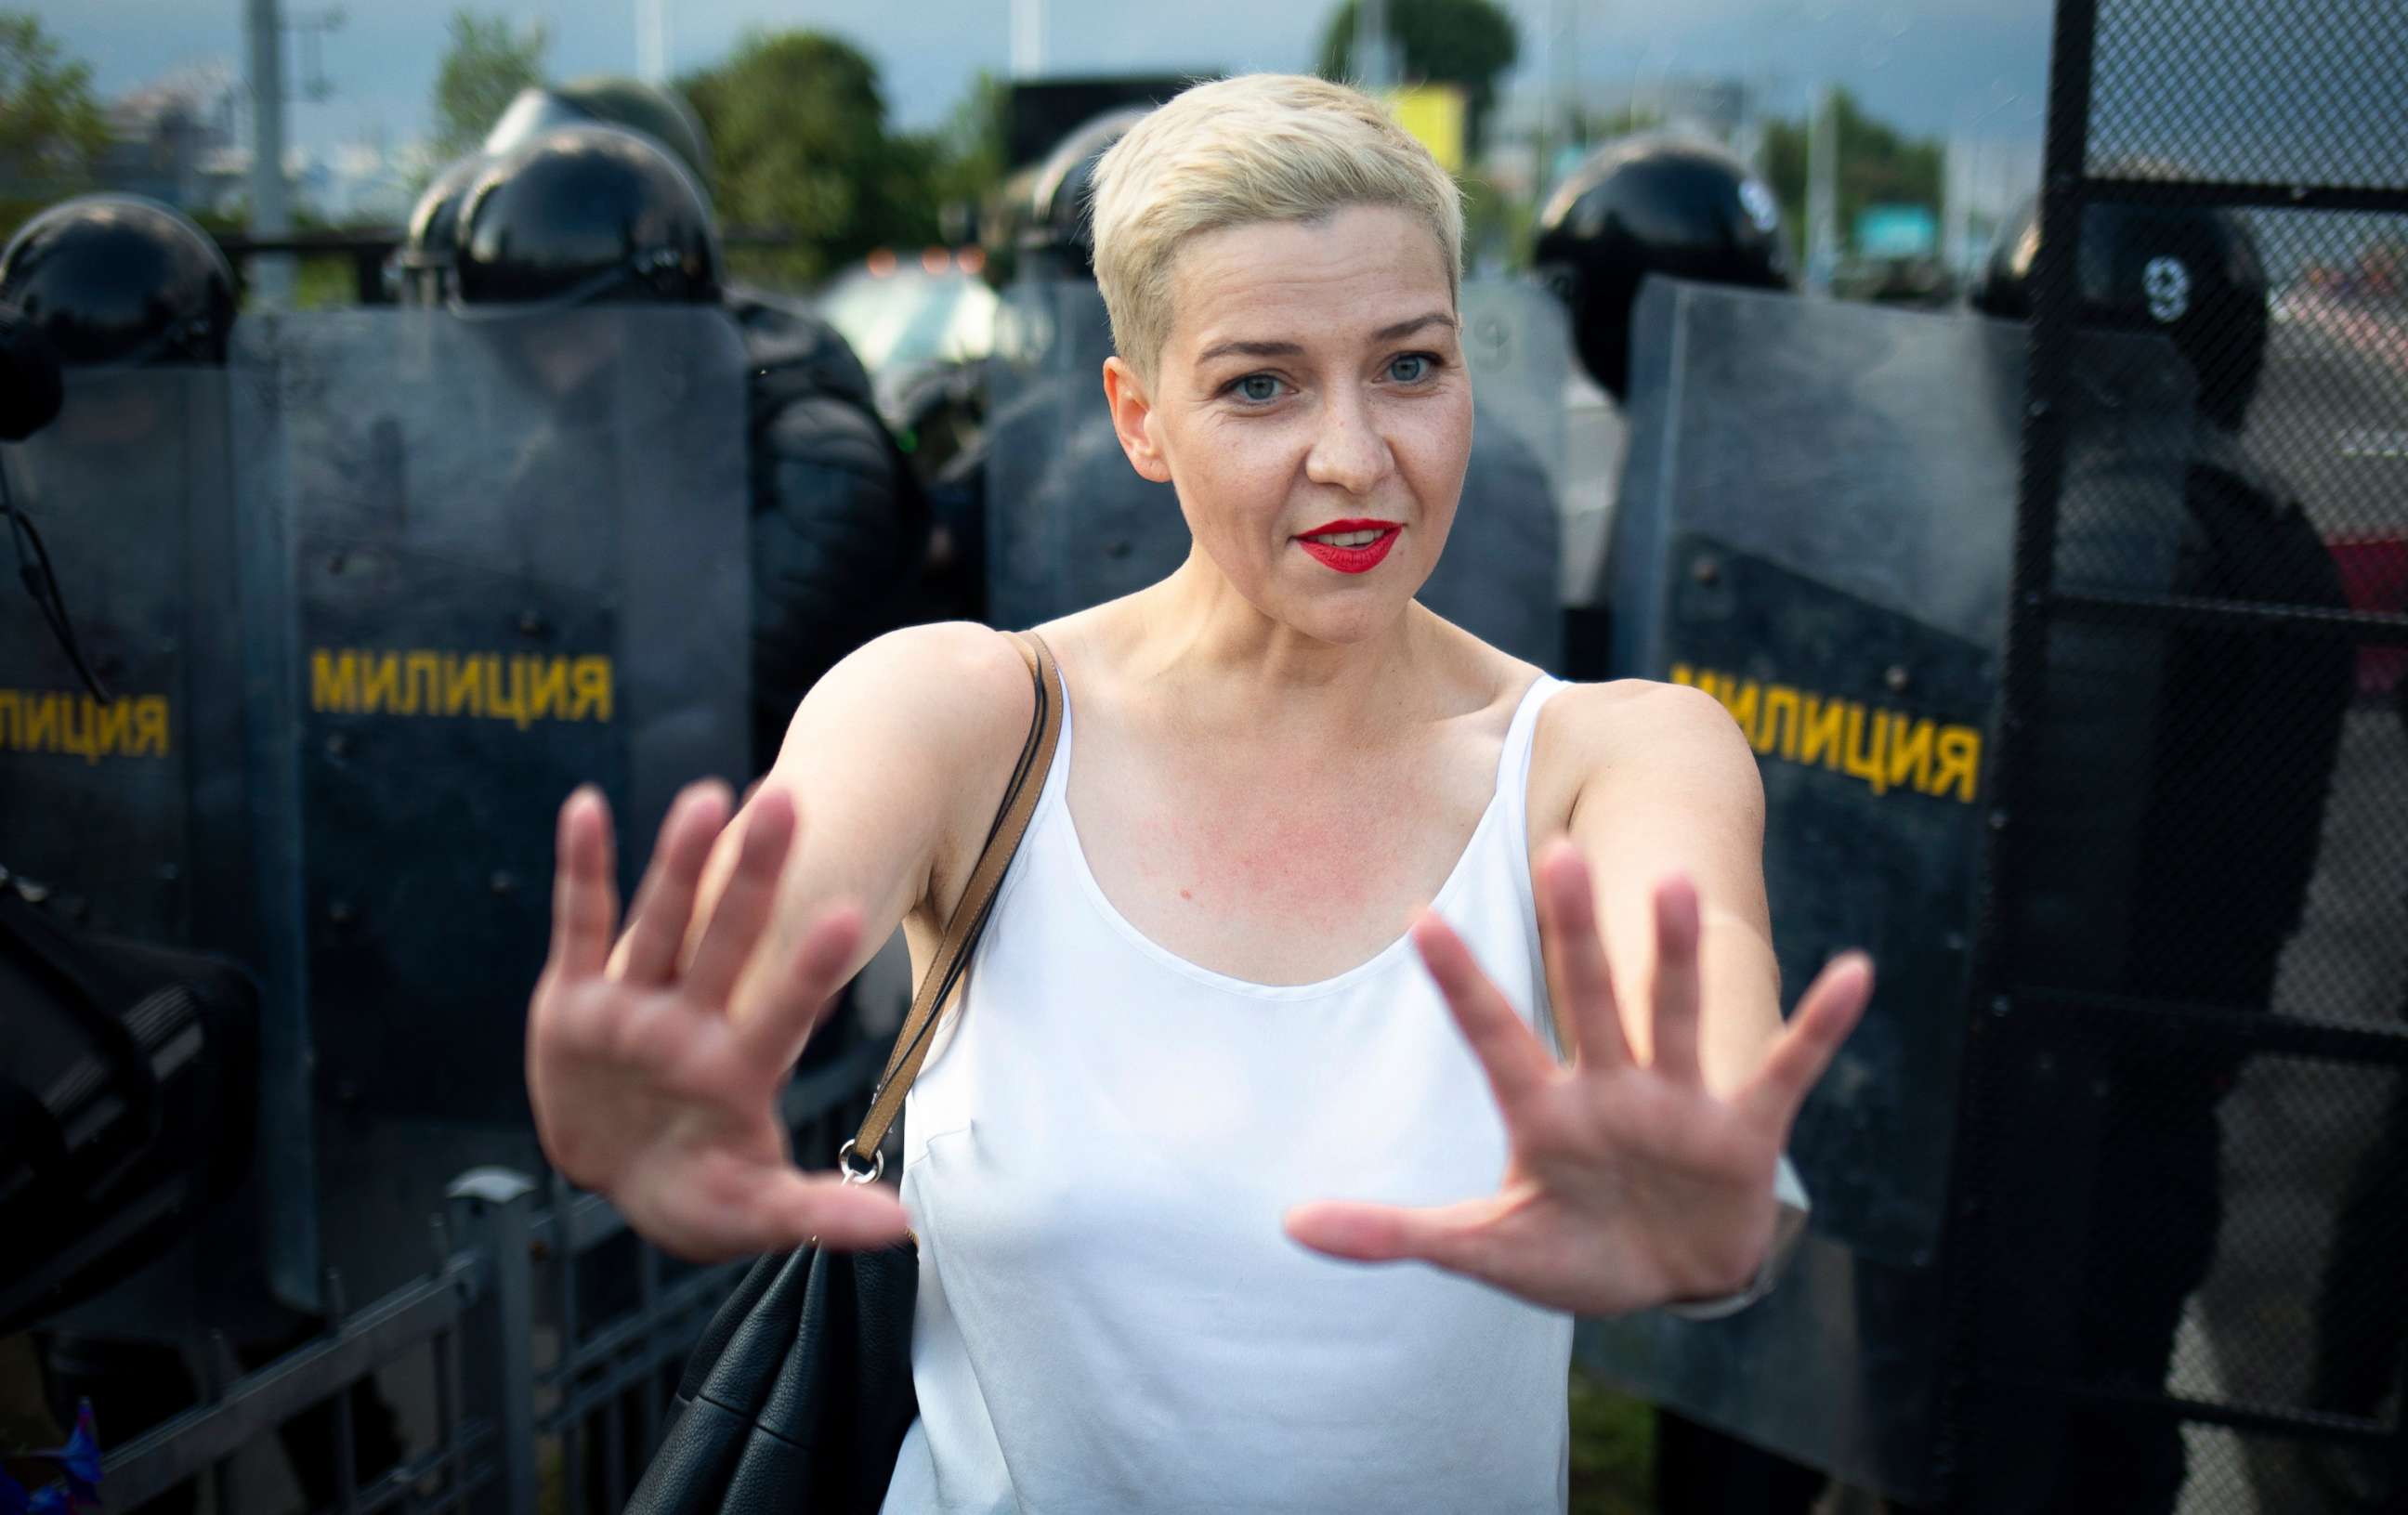 PHOTO: In this file photo taken Aug. 30, 2020, Belarusian opposition leader Maria Kolesnikova gestures during a rally in Minsk, Belarus.